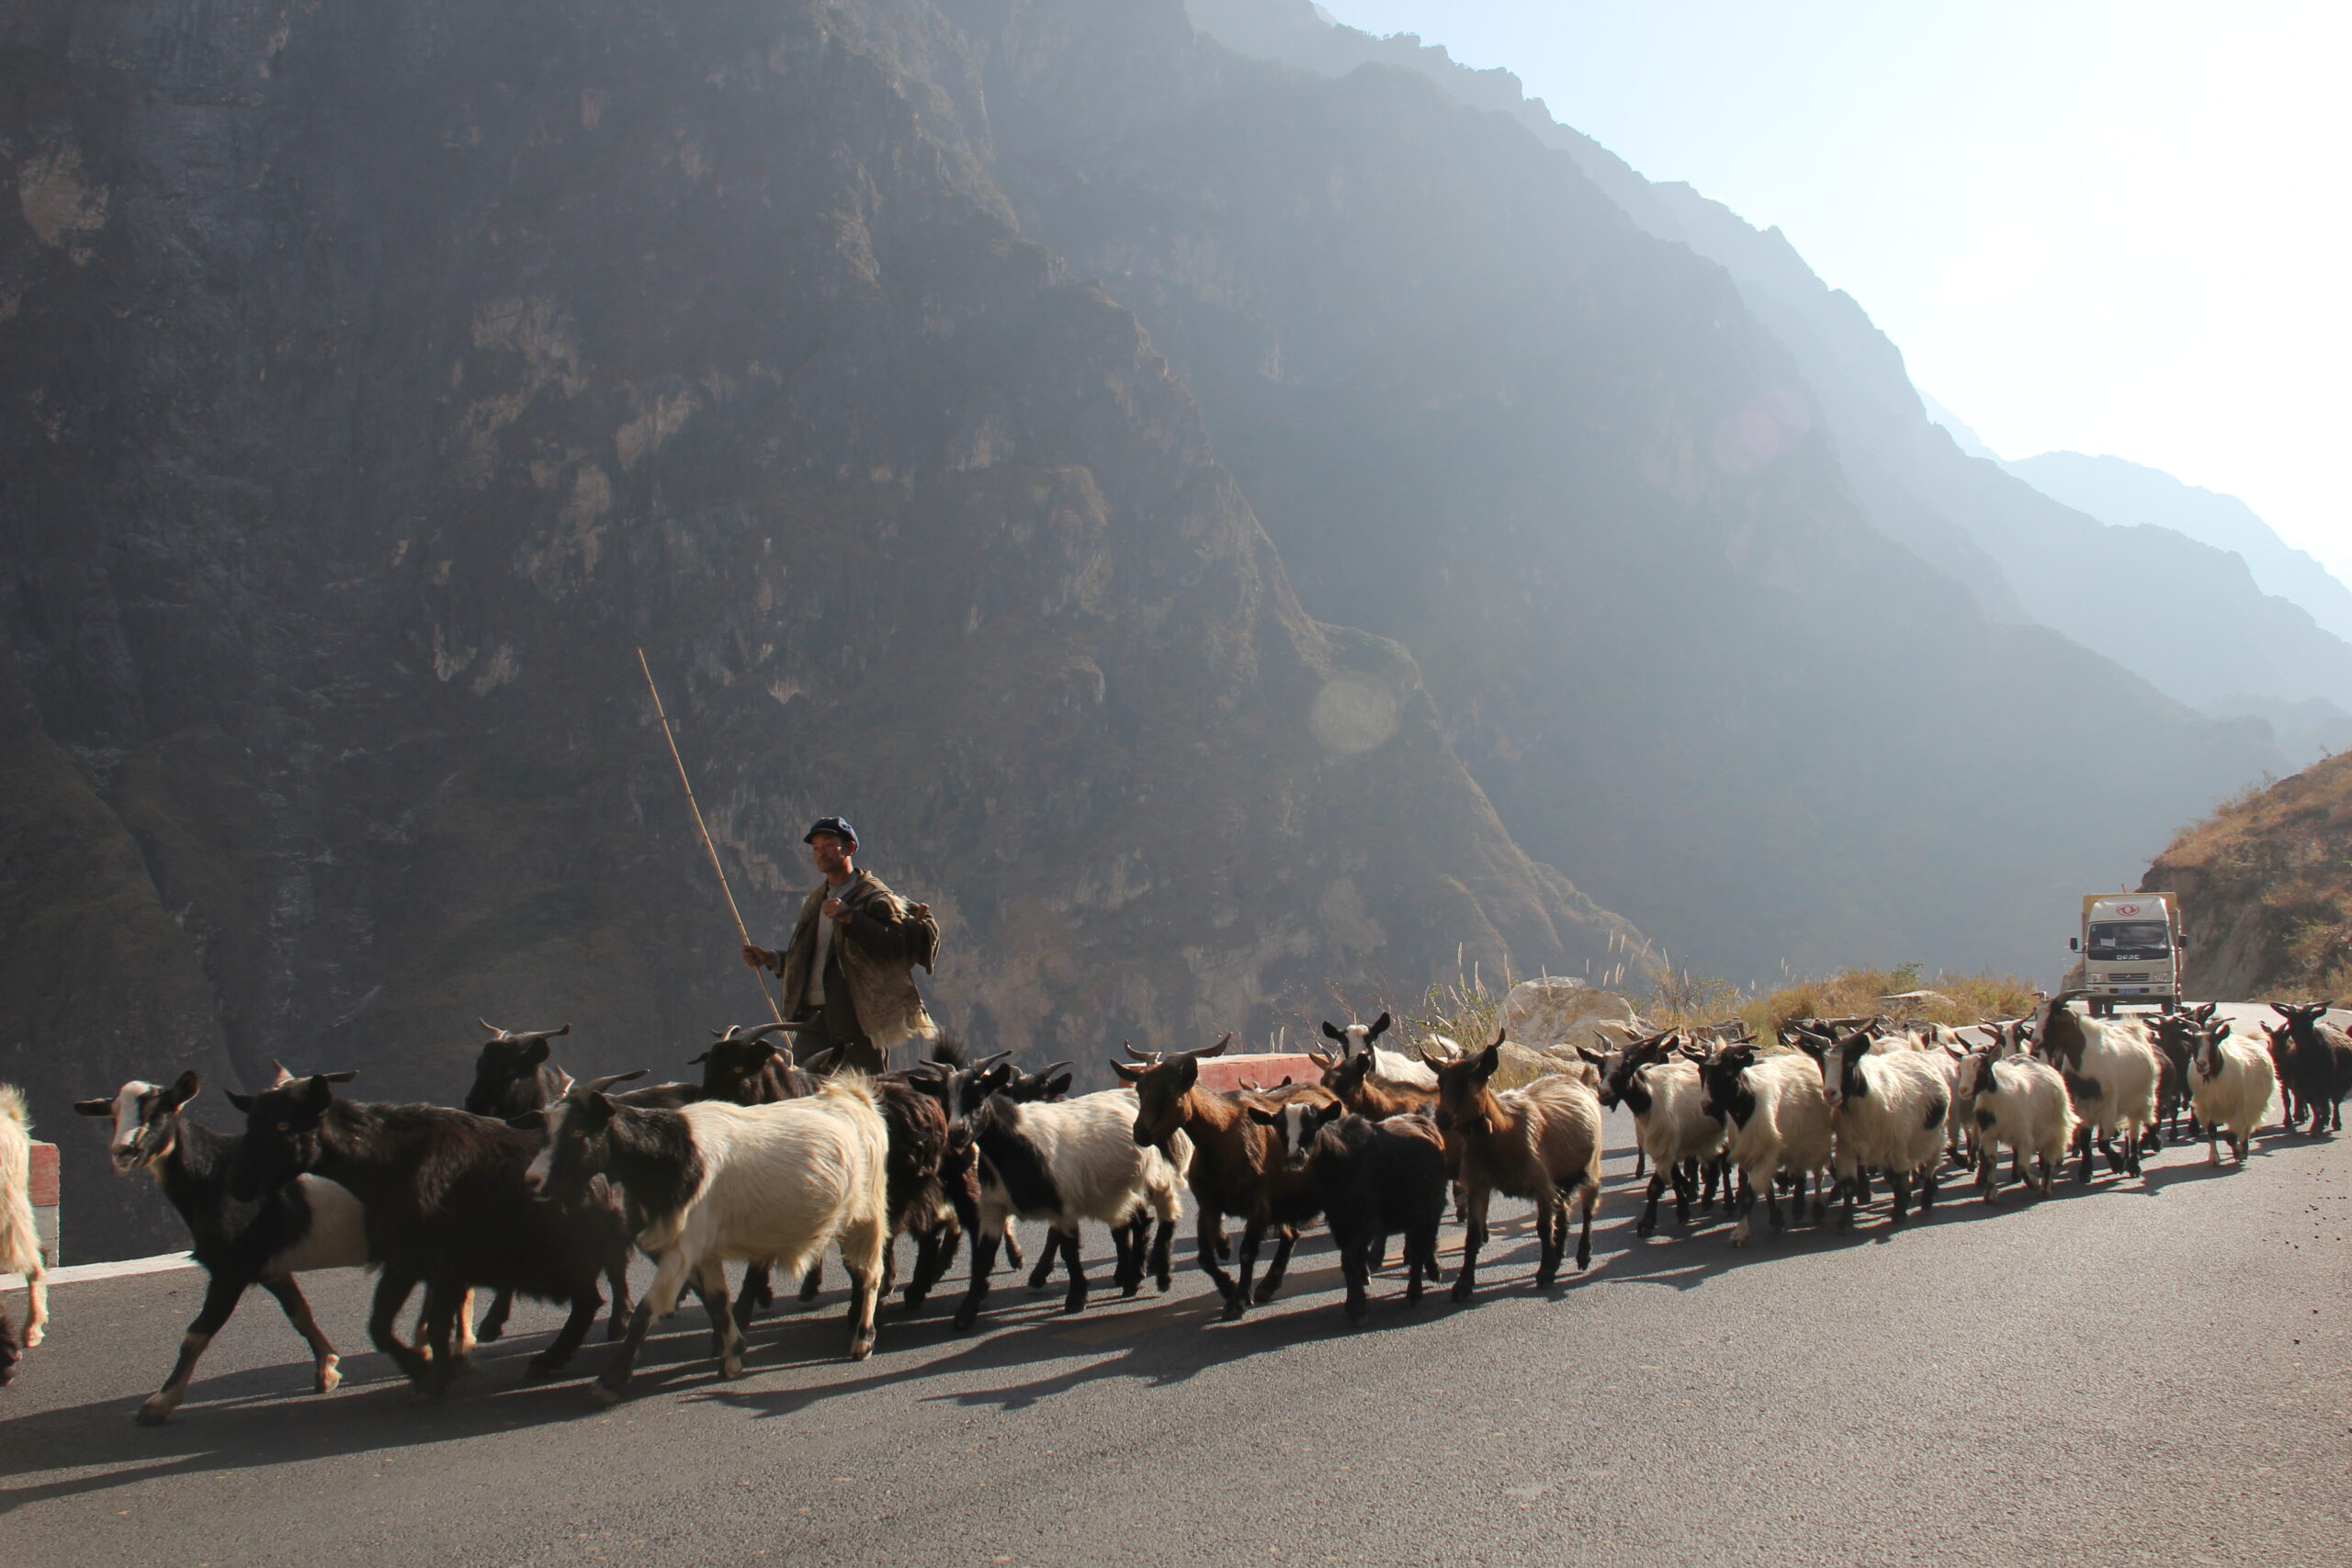 A farmer herds goats on a newly-paved road in China's Tiger Leaping Gorge.